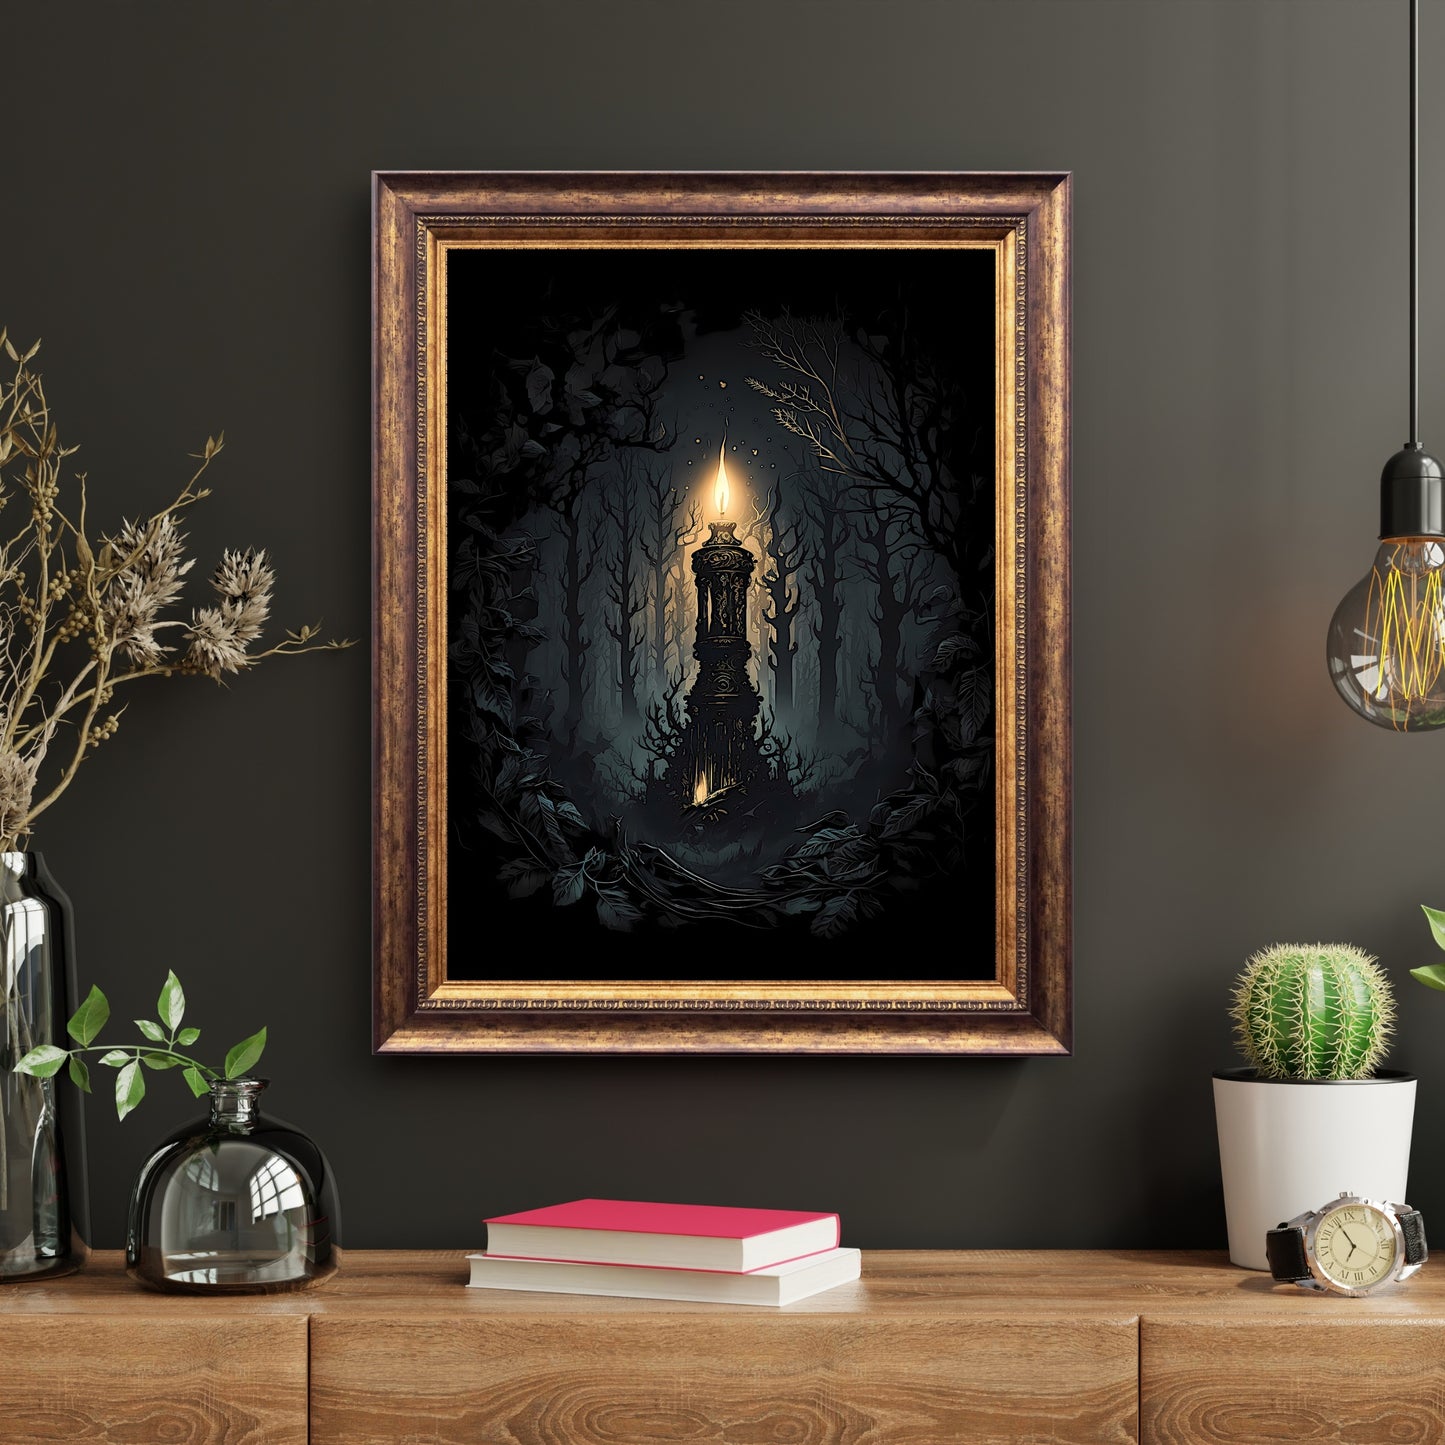 Magic Candle in Woodland Dark Fairycore Paper Poster Prints Wall Art Gothic Artwork Witchy Decor Dark Cottagecore Mystical Artwork Goblincore Print